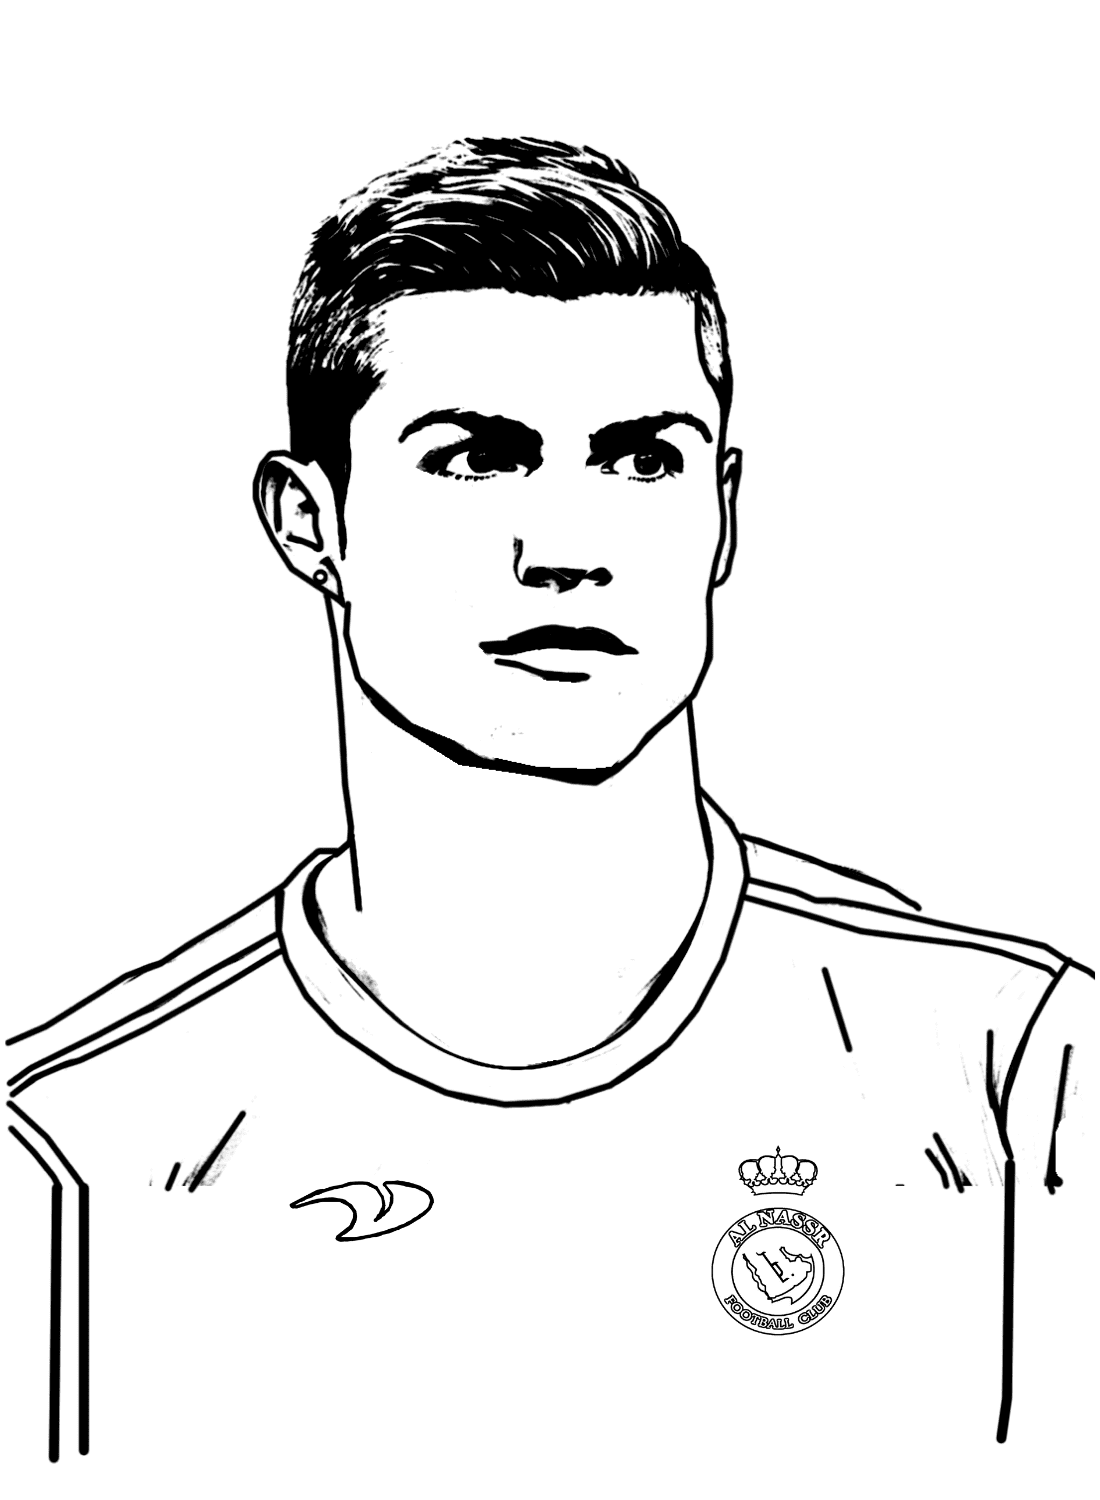 Cool Cristiano Ronaldo Drawing Coloring Pages from Cristiano Ronaldo